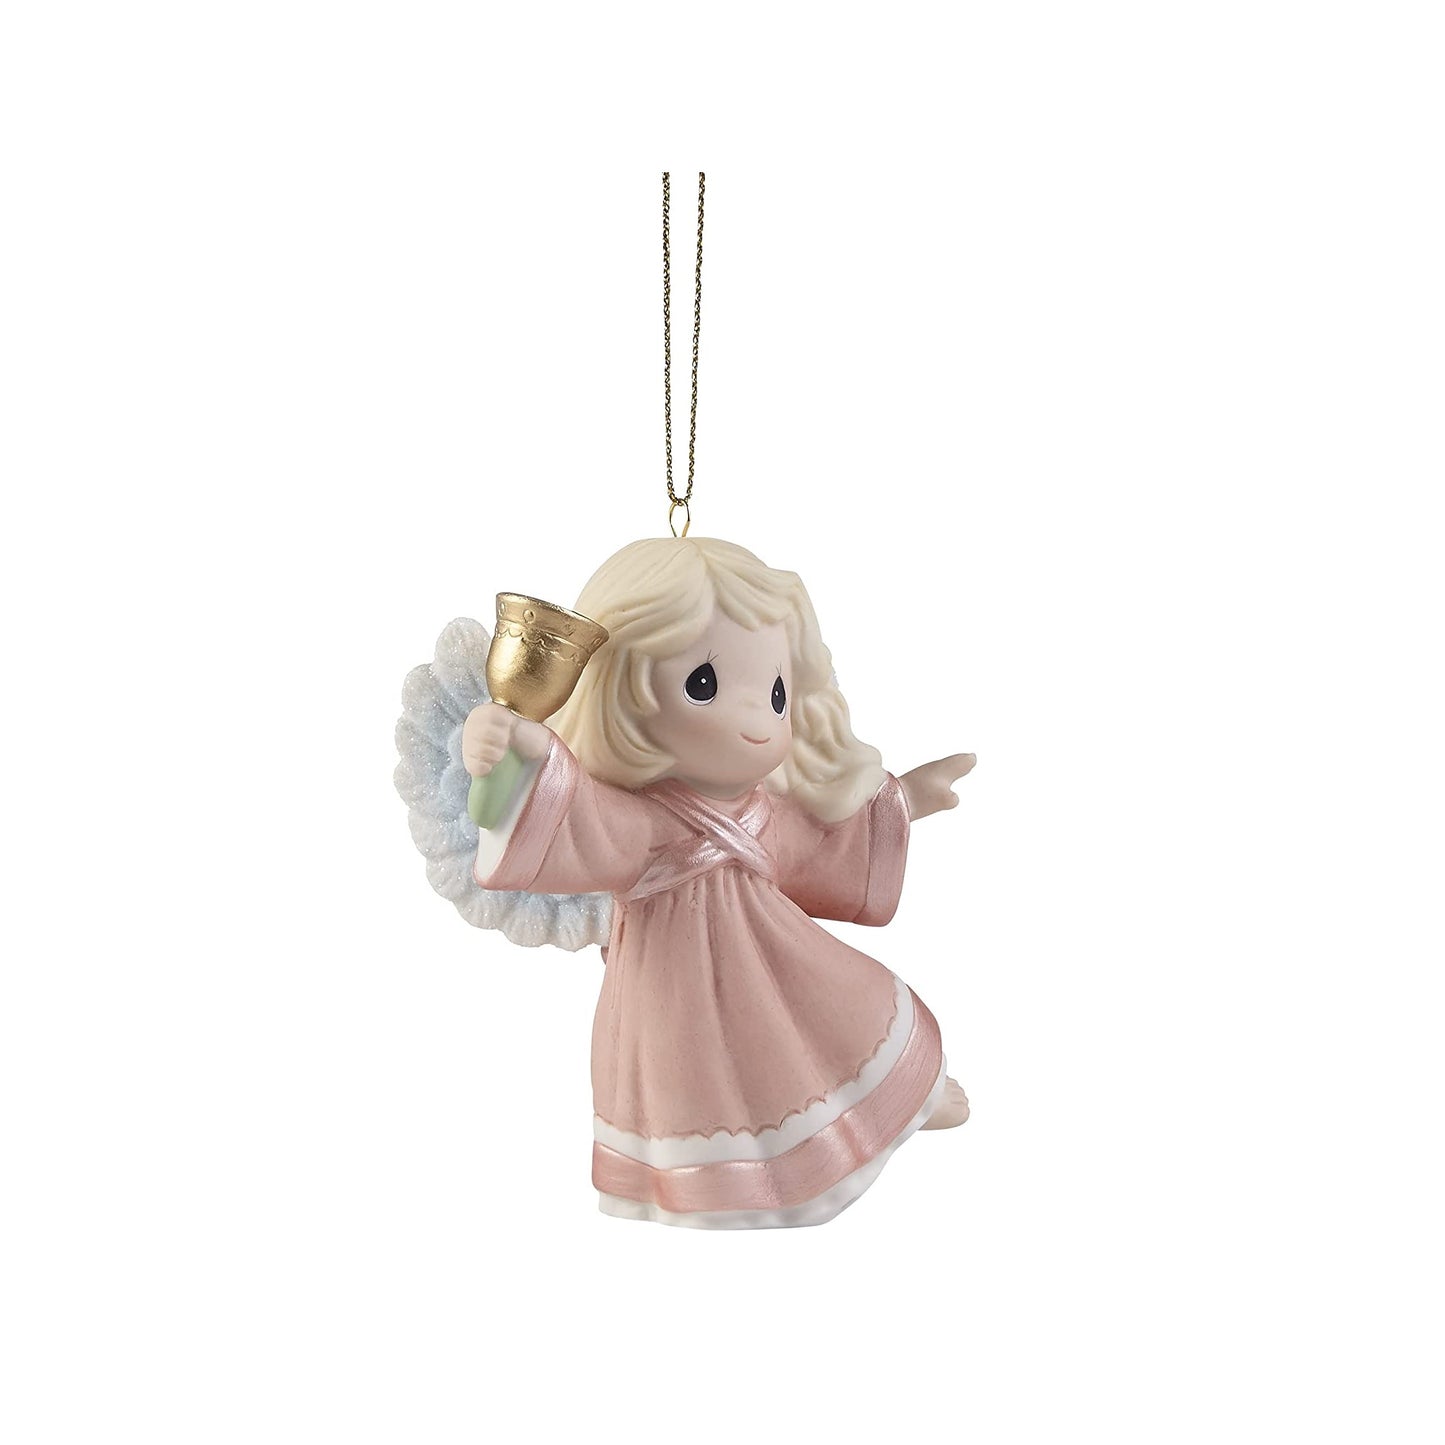 Precious Moments Ringing In Holiday Cheer Annual Angel Ornament